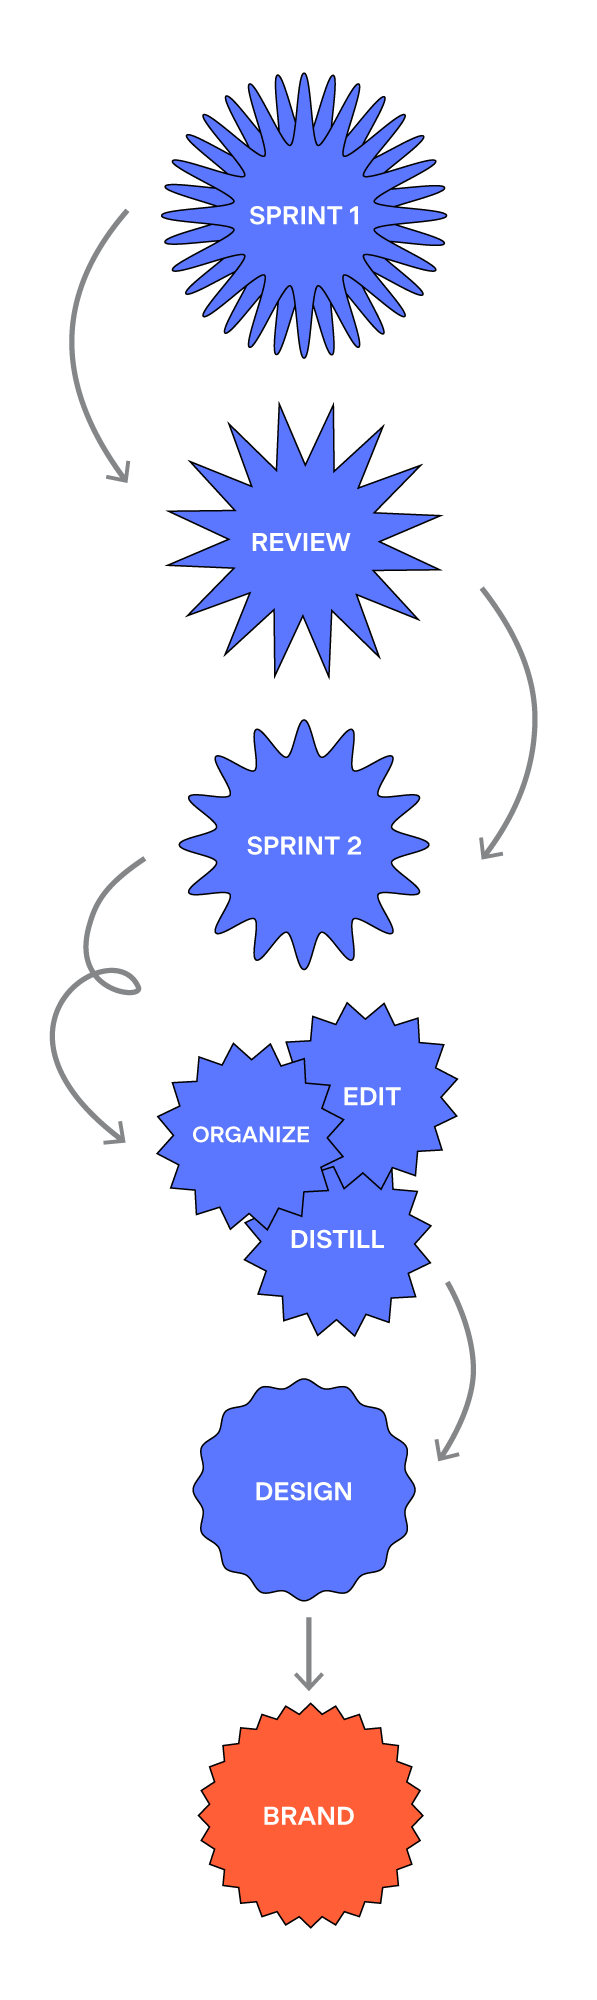 A graphic showing the steps of the design process: Sprint 1, Review, Sprint 2, Organize, Edit, Distill, Design, Brand